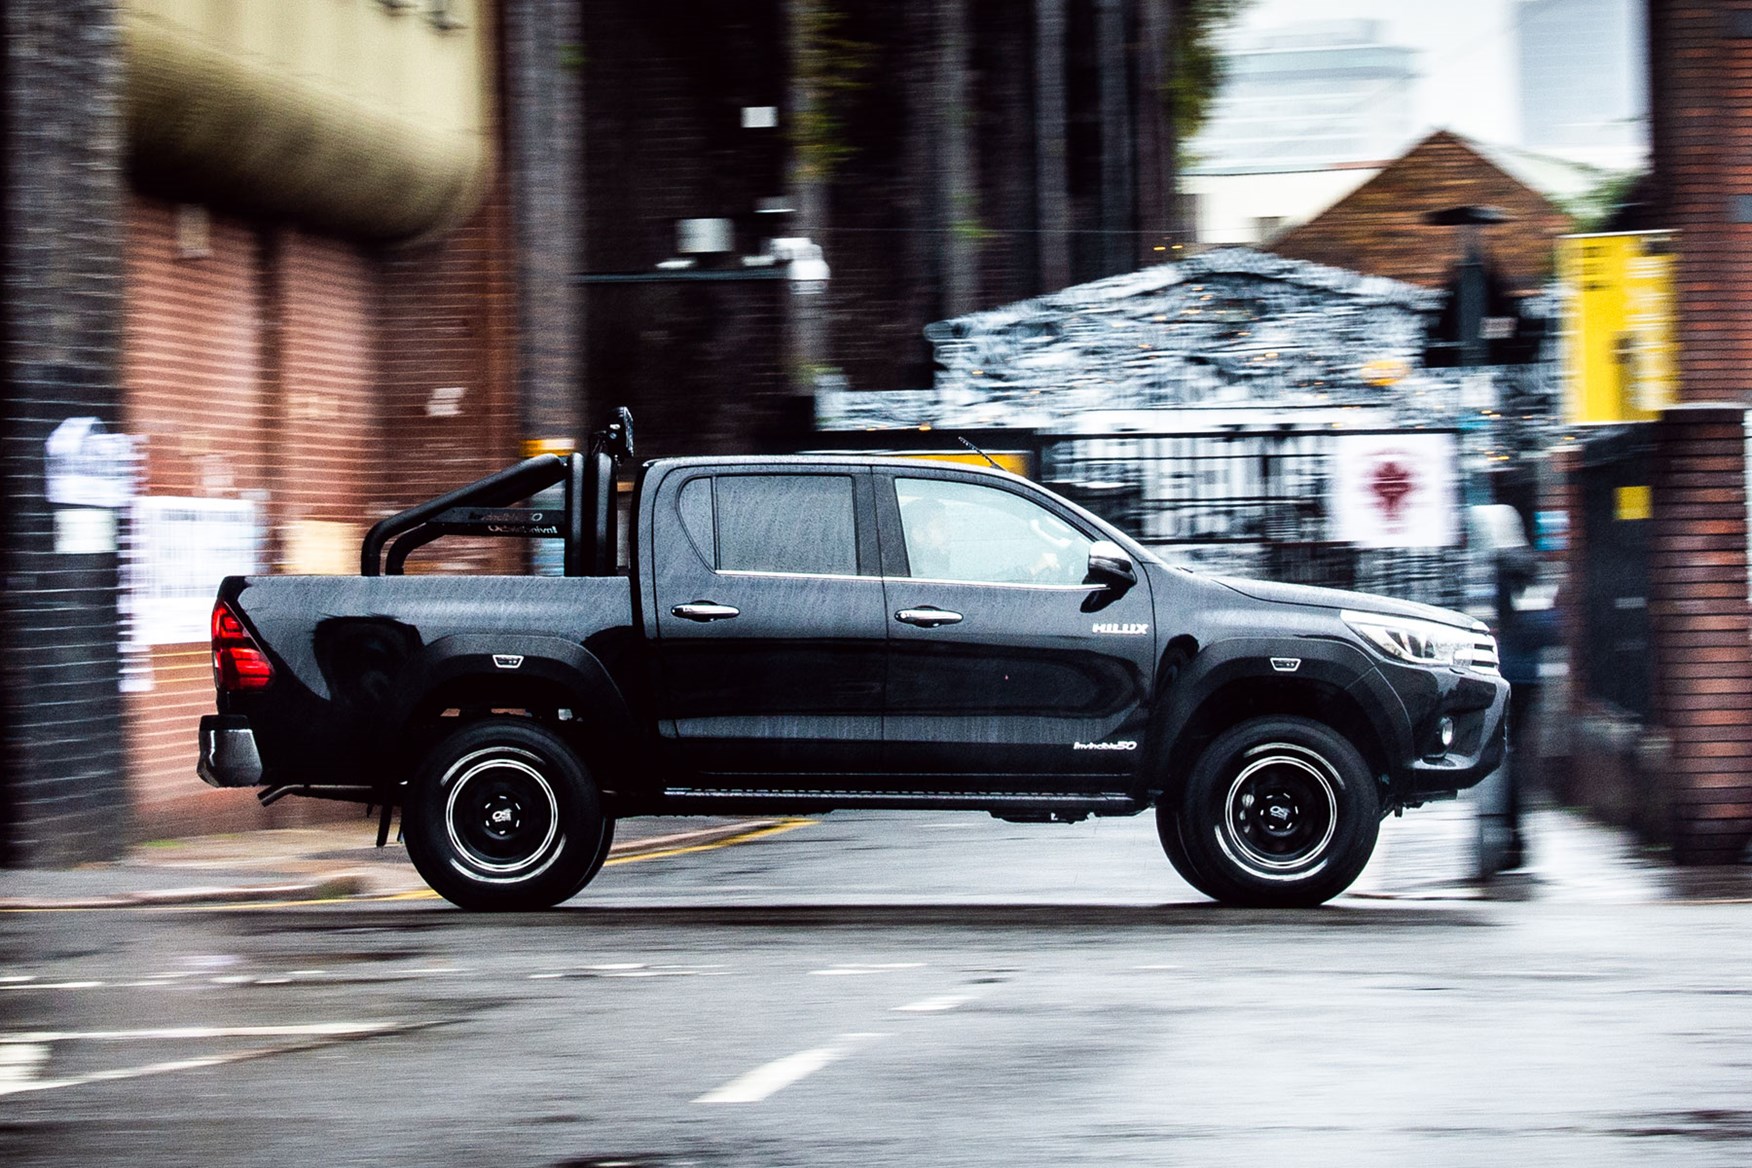 Toyota Hilux Invincible 50 review - driving, side view, in the rain